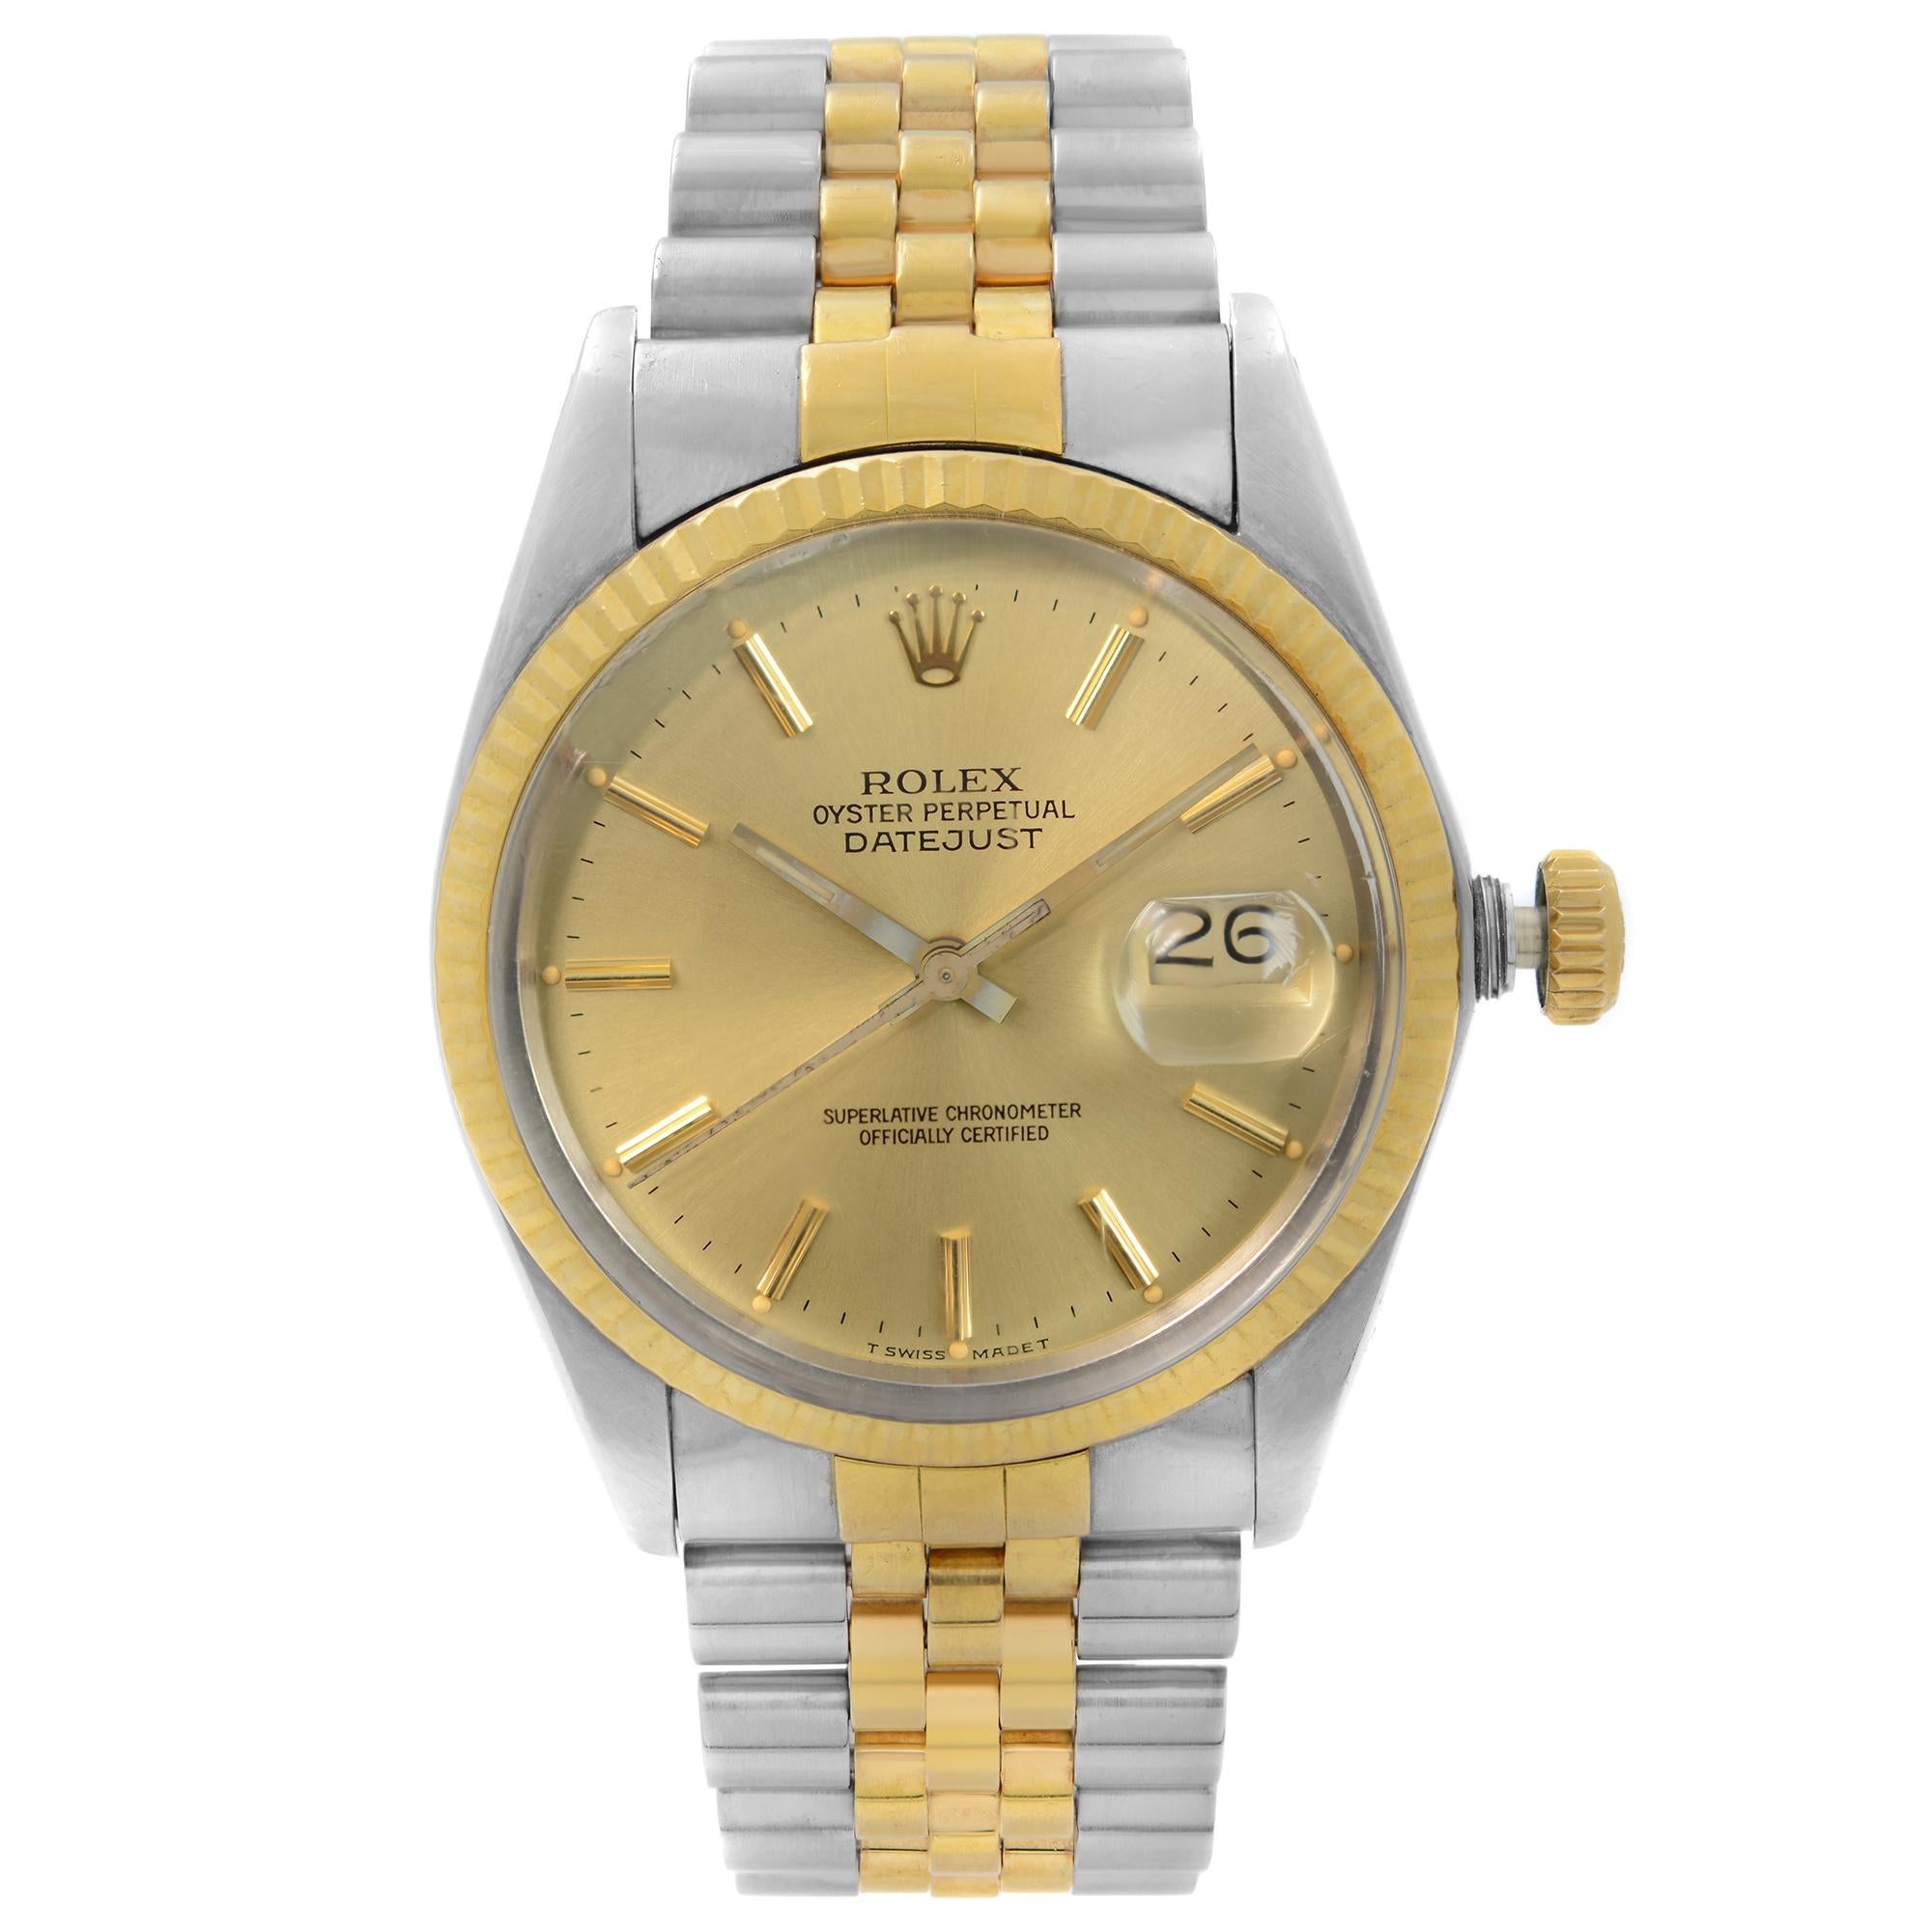 Pre Owned Rolex Datejust 36mm 18k Gold Steel Champagne Dial Automatic Men's Watch 16013.  The watch was produced in 1986. The Watch Bracelet Has a Moderate Slack, Minor Oxidation Shown on the Rolex Logo Crown at the 12 O'clock Position. The second